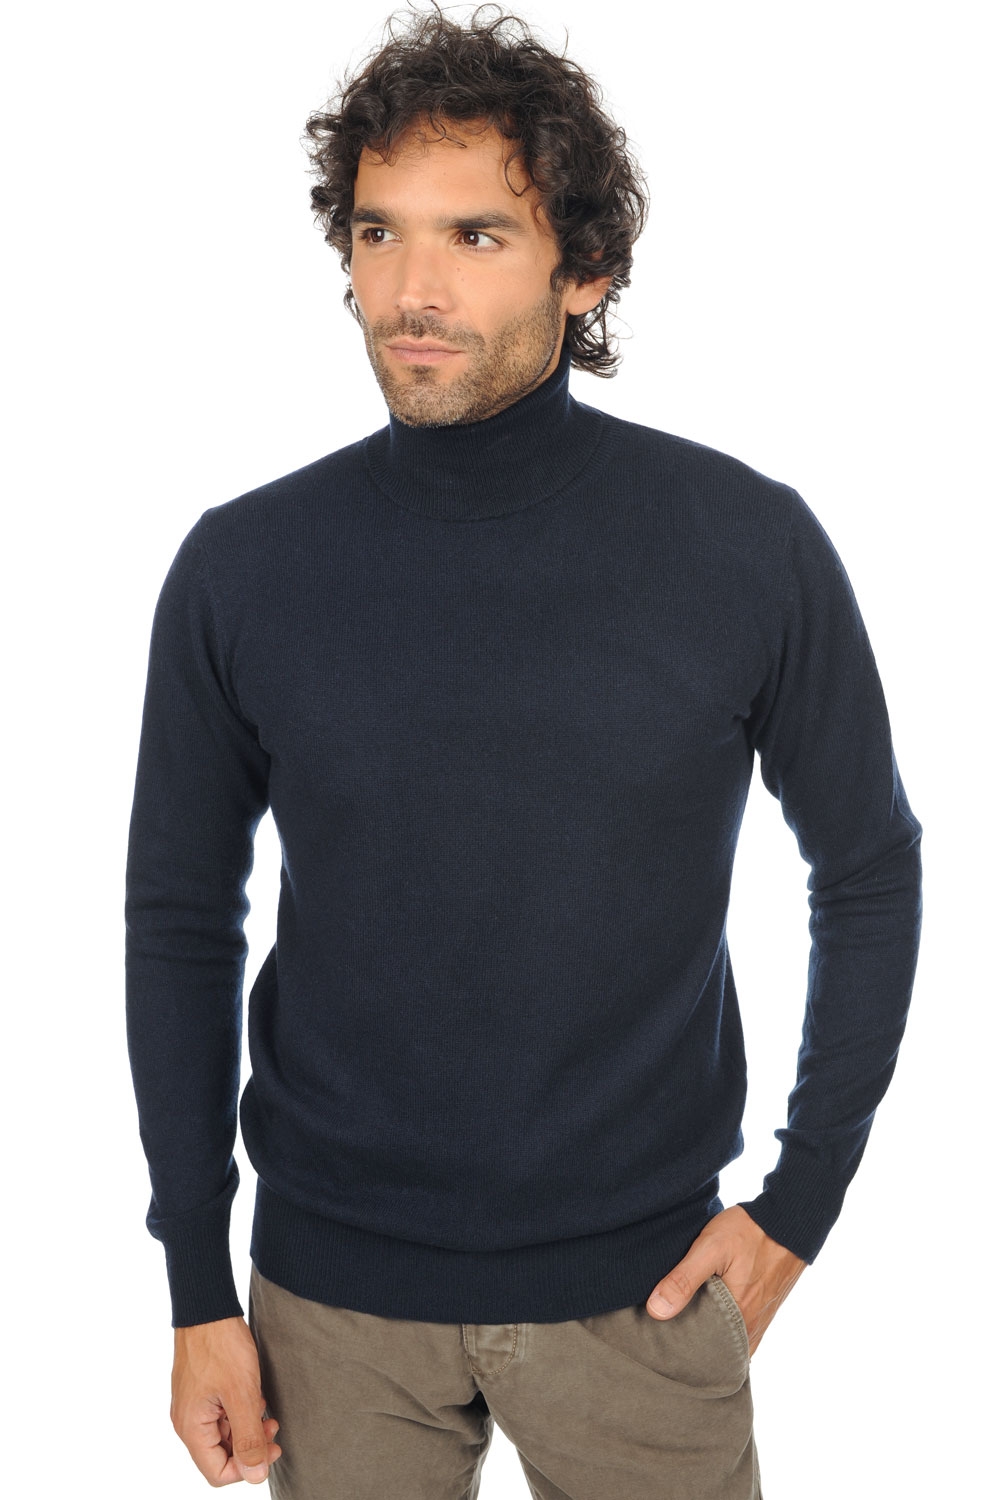 Cashmere men basic sweaters at low prices tarry first dress blue xl